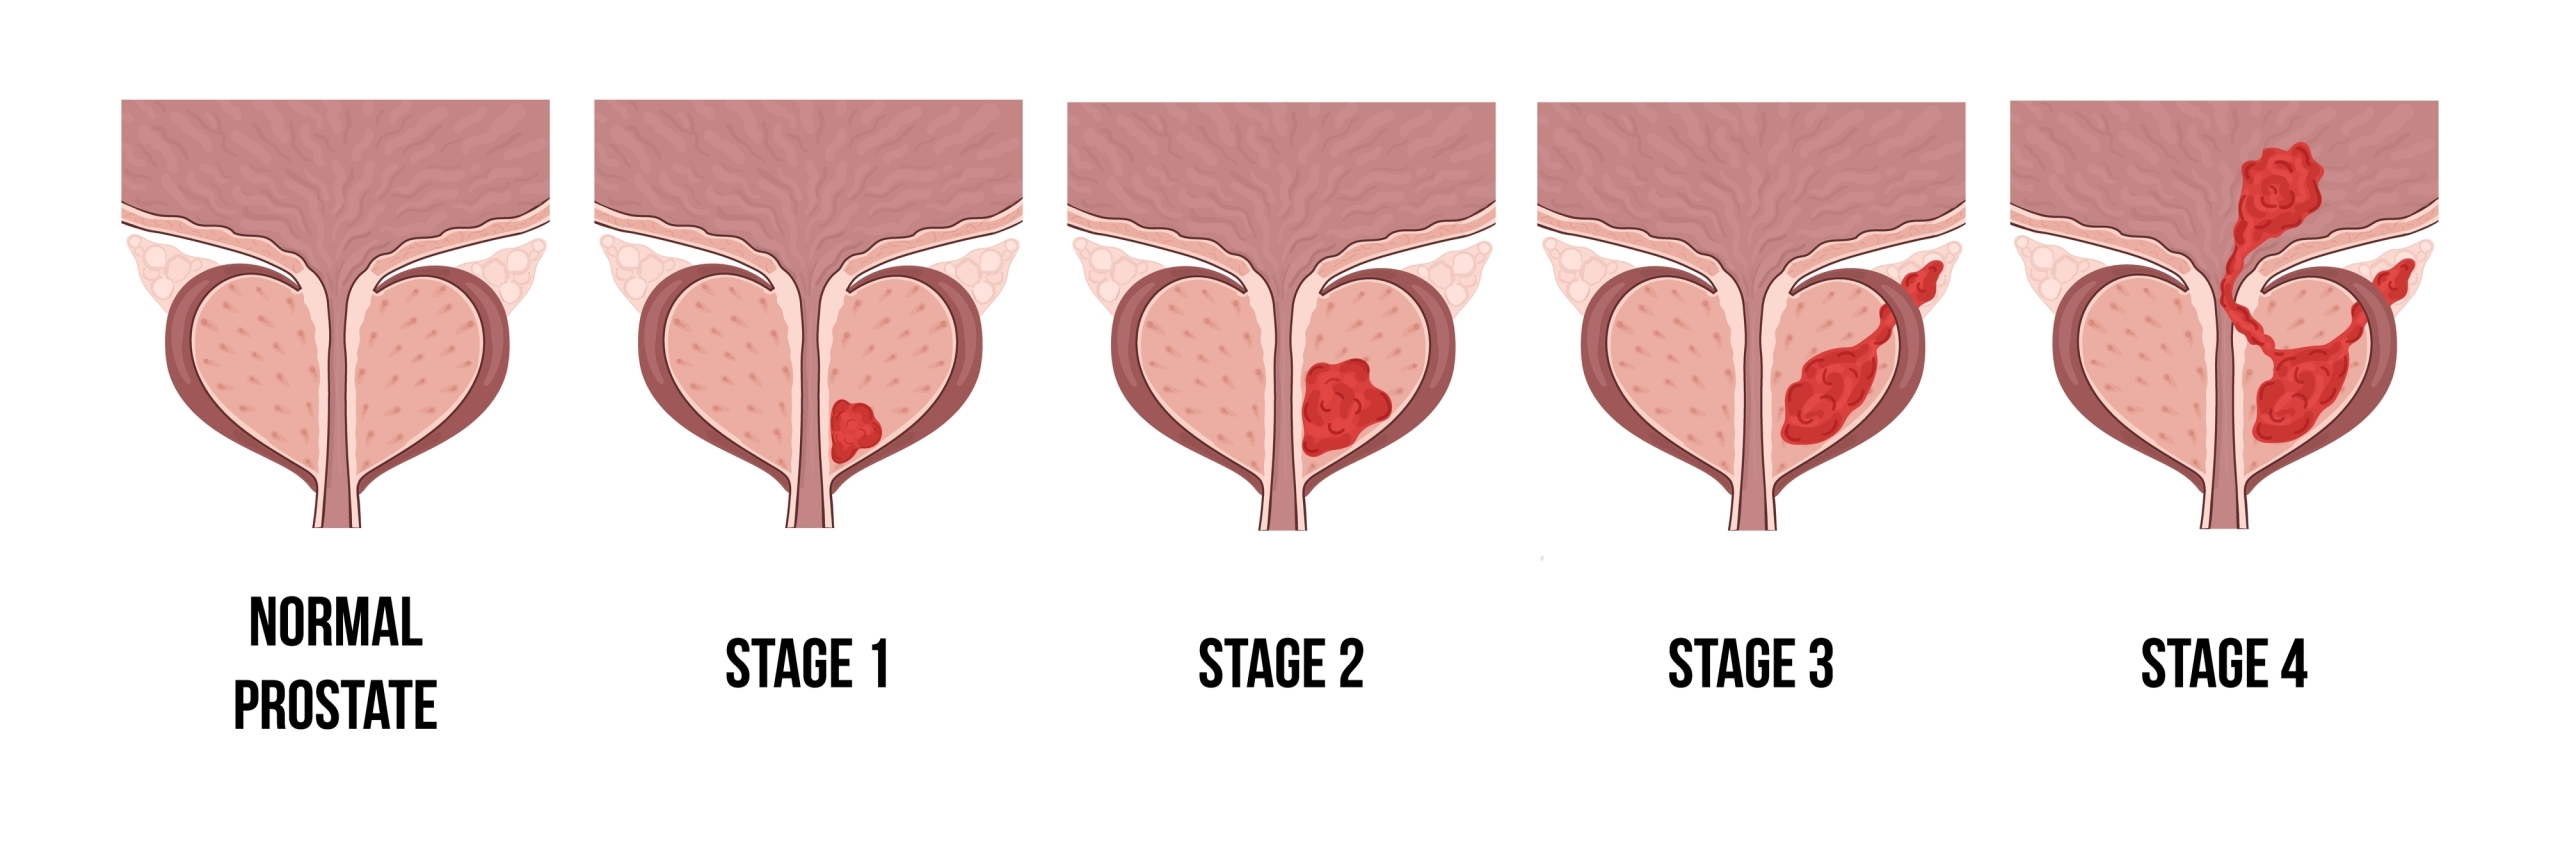 stages of prostate cancer graphic